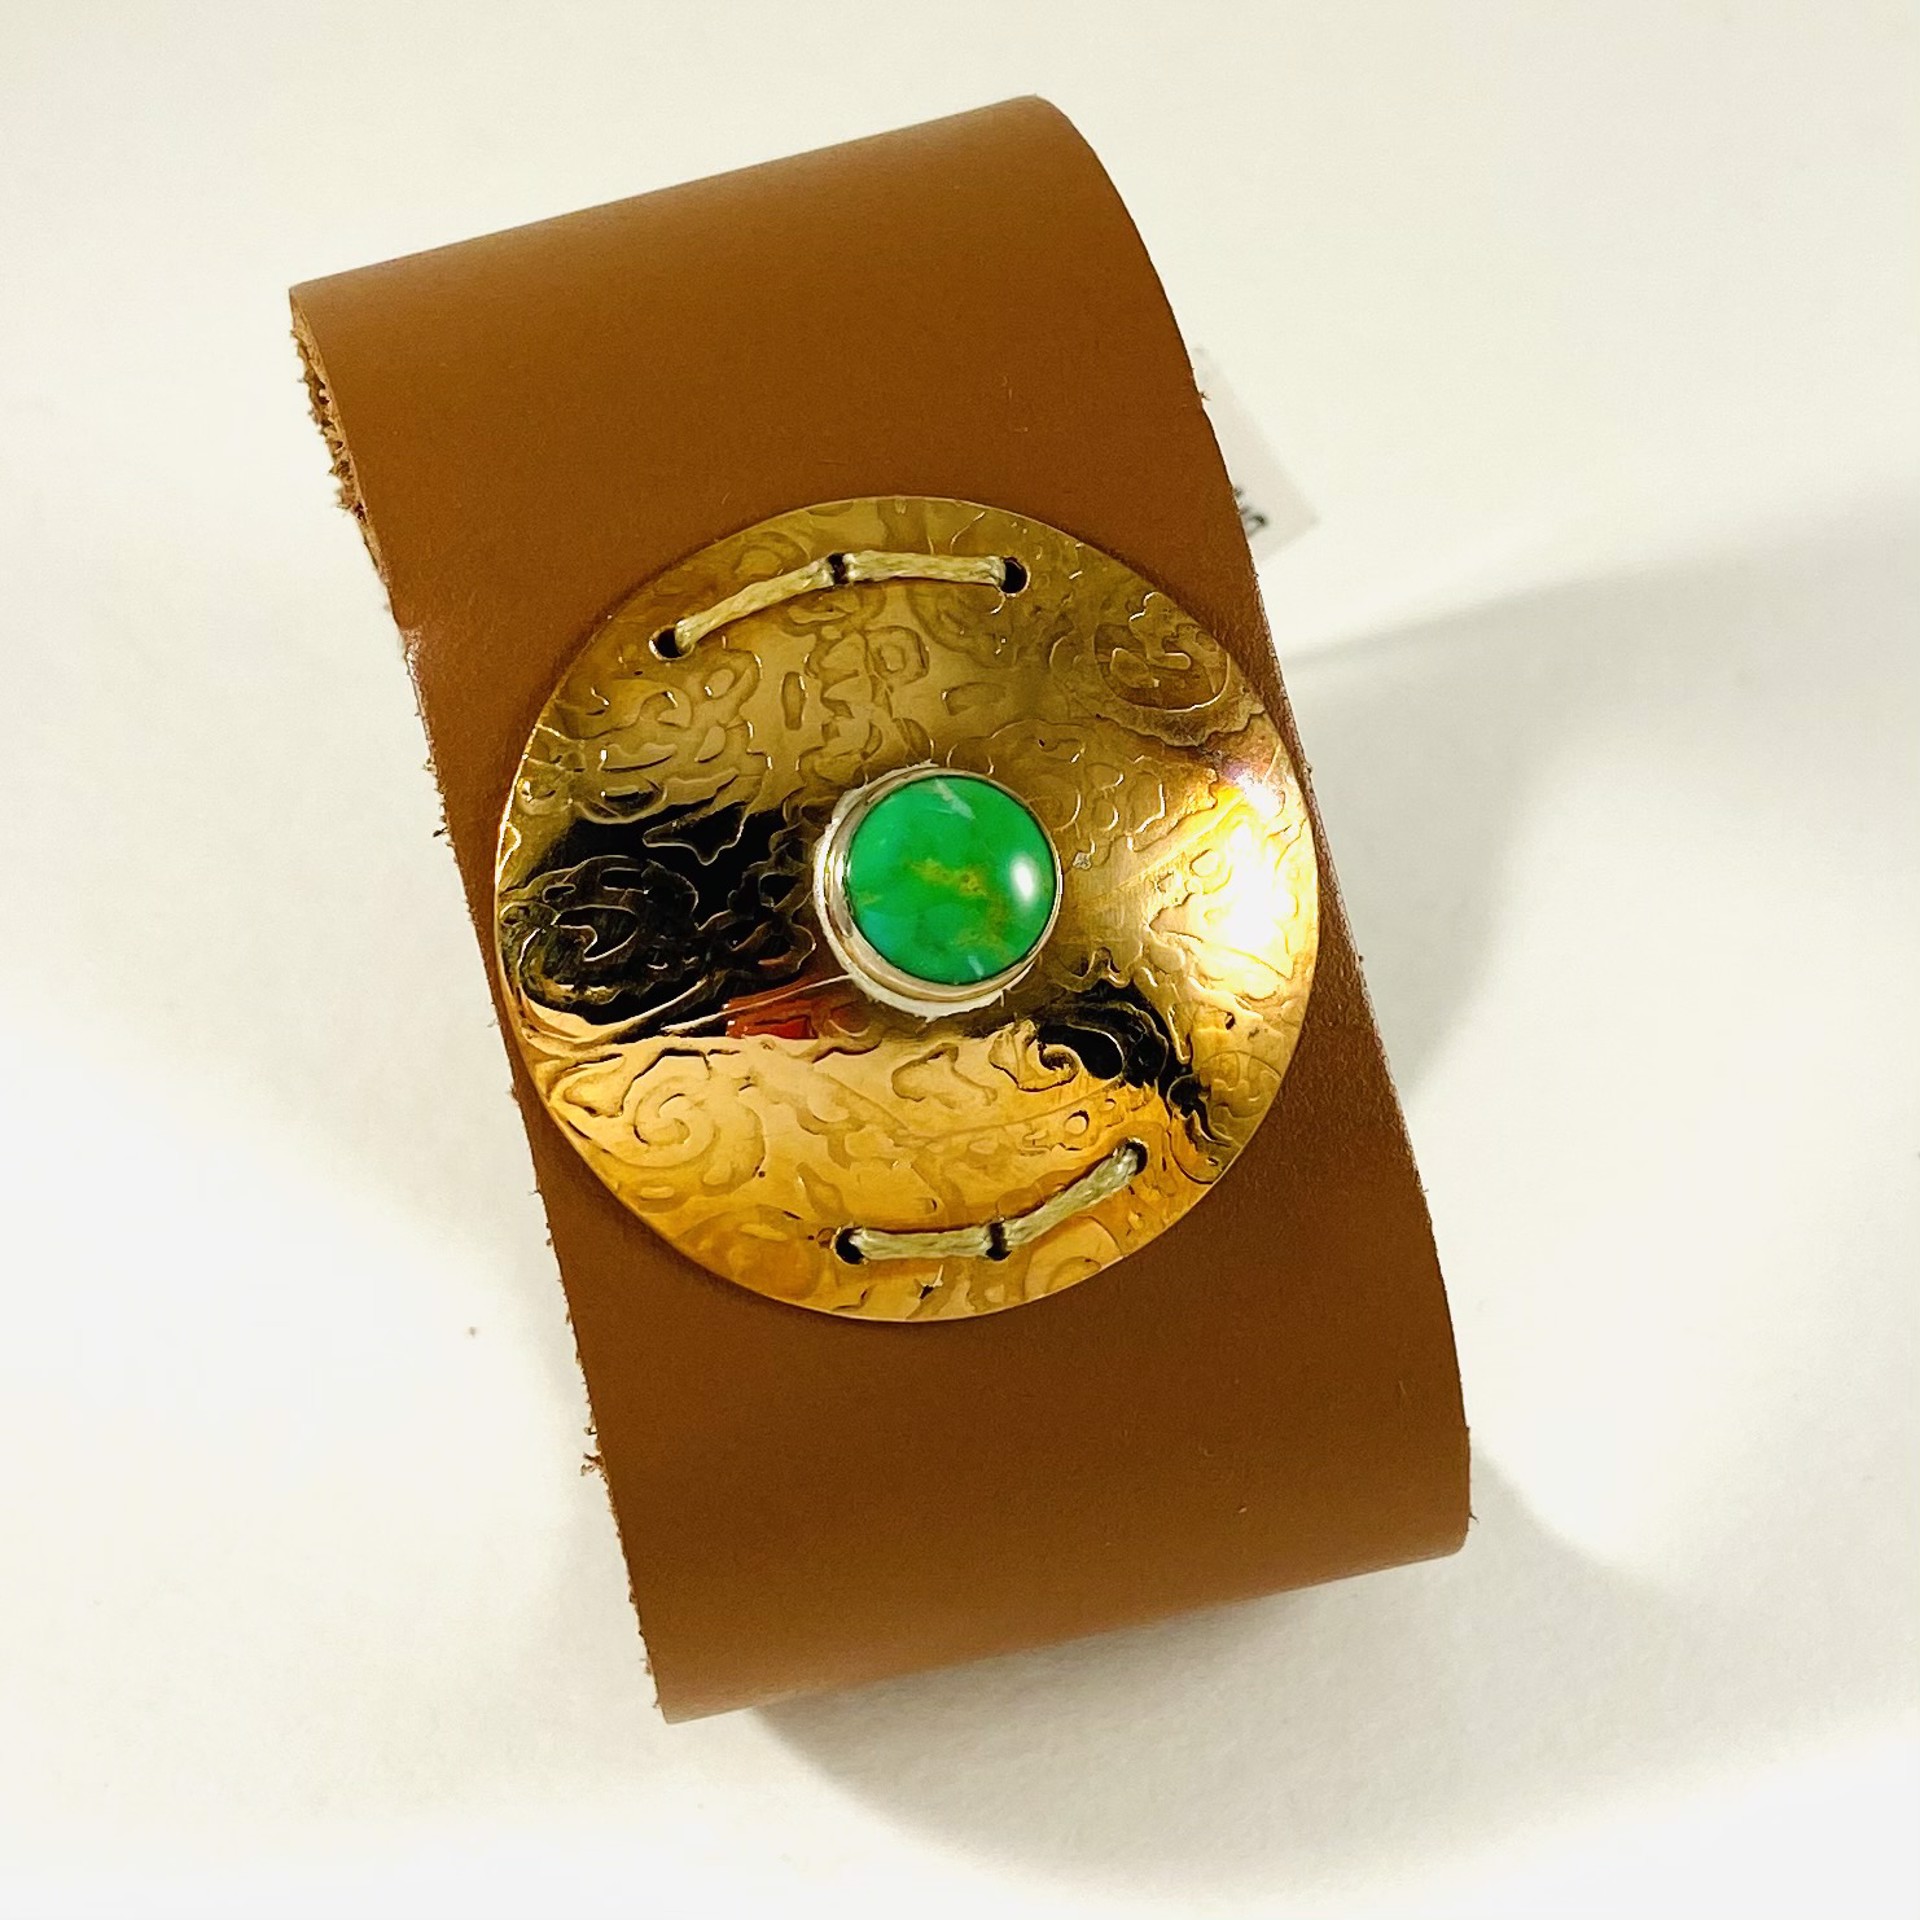 Green Turquoise and Bronze on Leather Cuff Bracelet by Anne Bivens